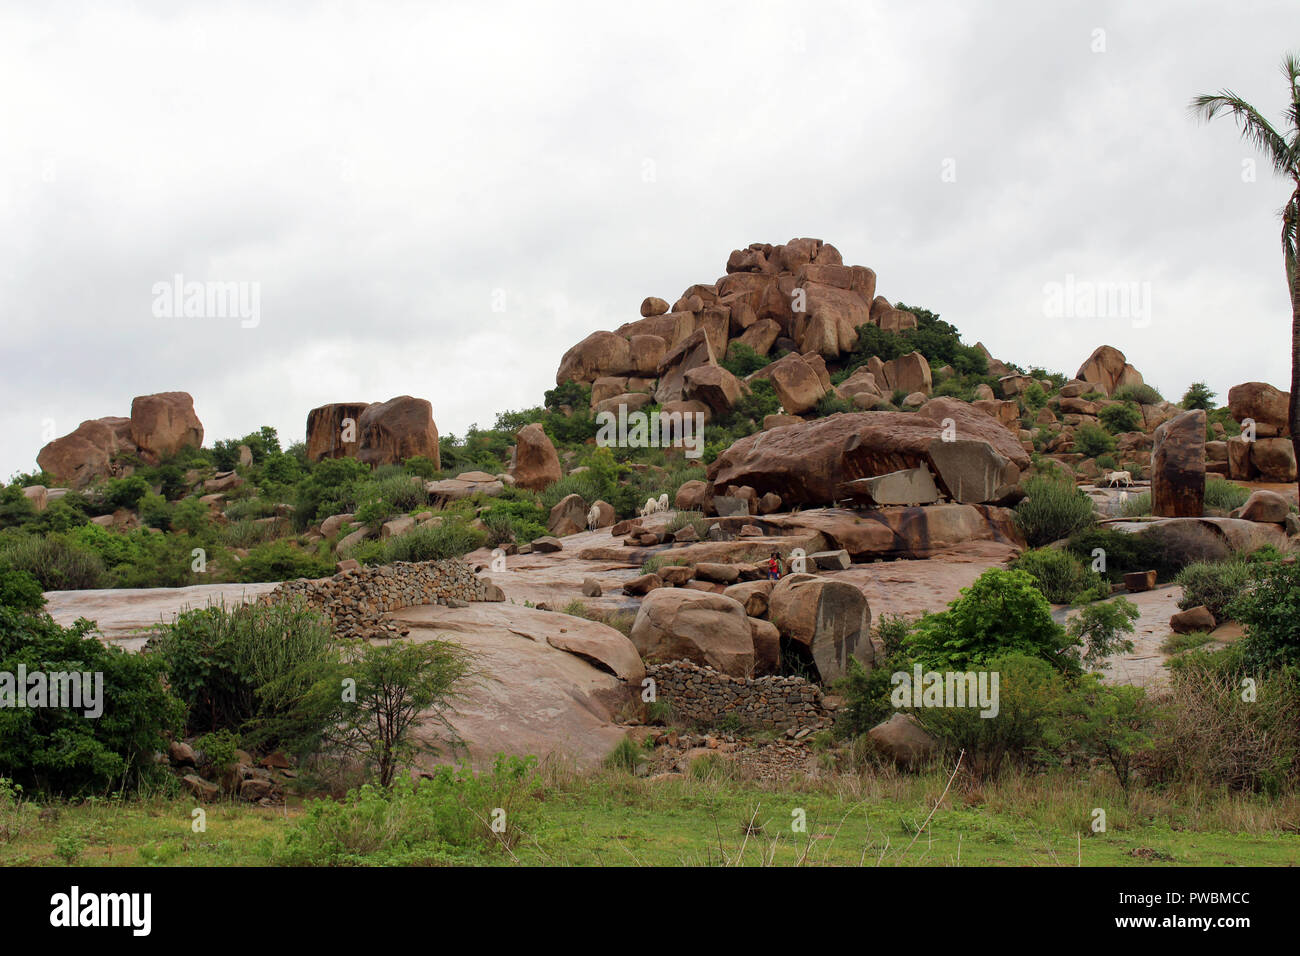 Sheeps roaming around the hill of Hampi, (probably) unguided. Taken in India, August 2018. Stock Photo